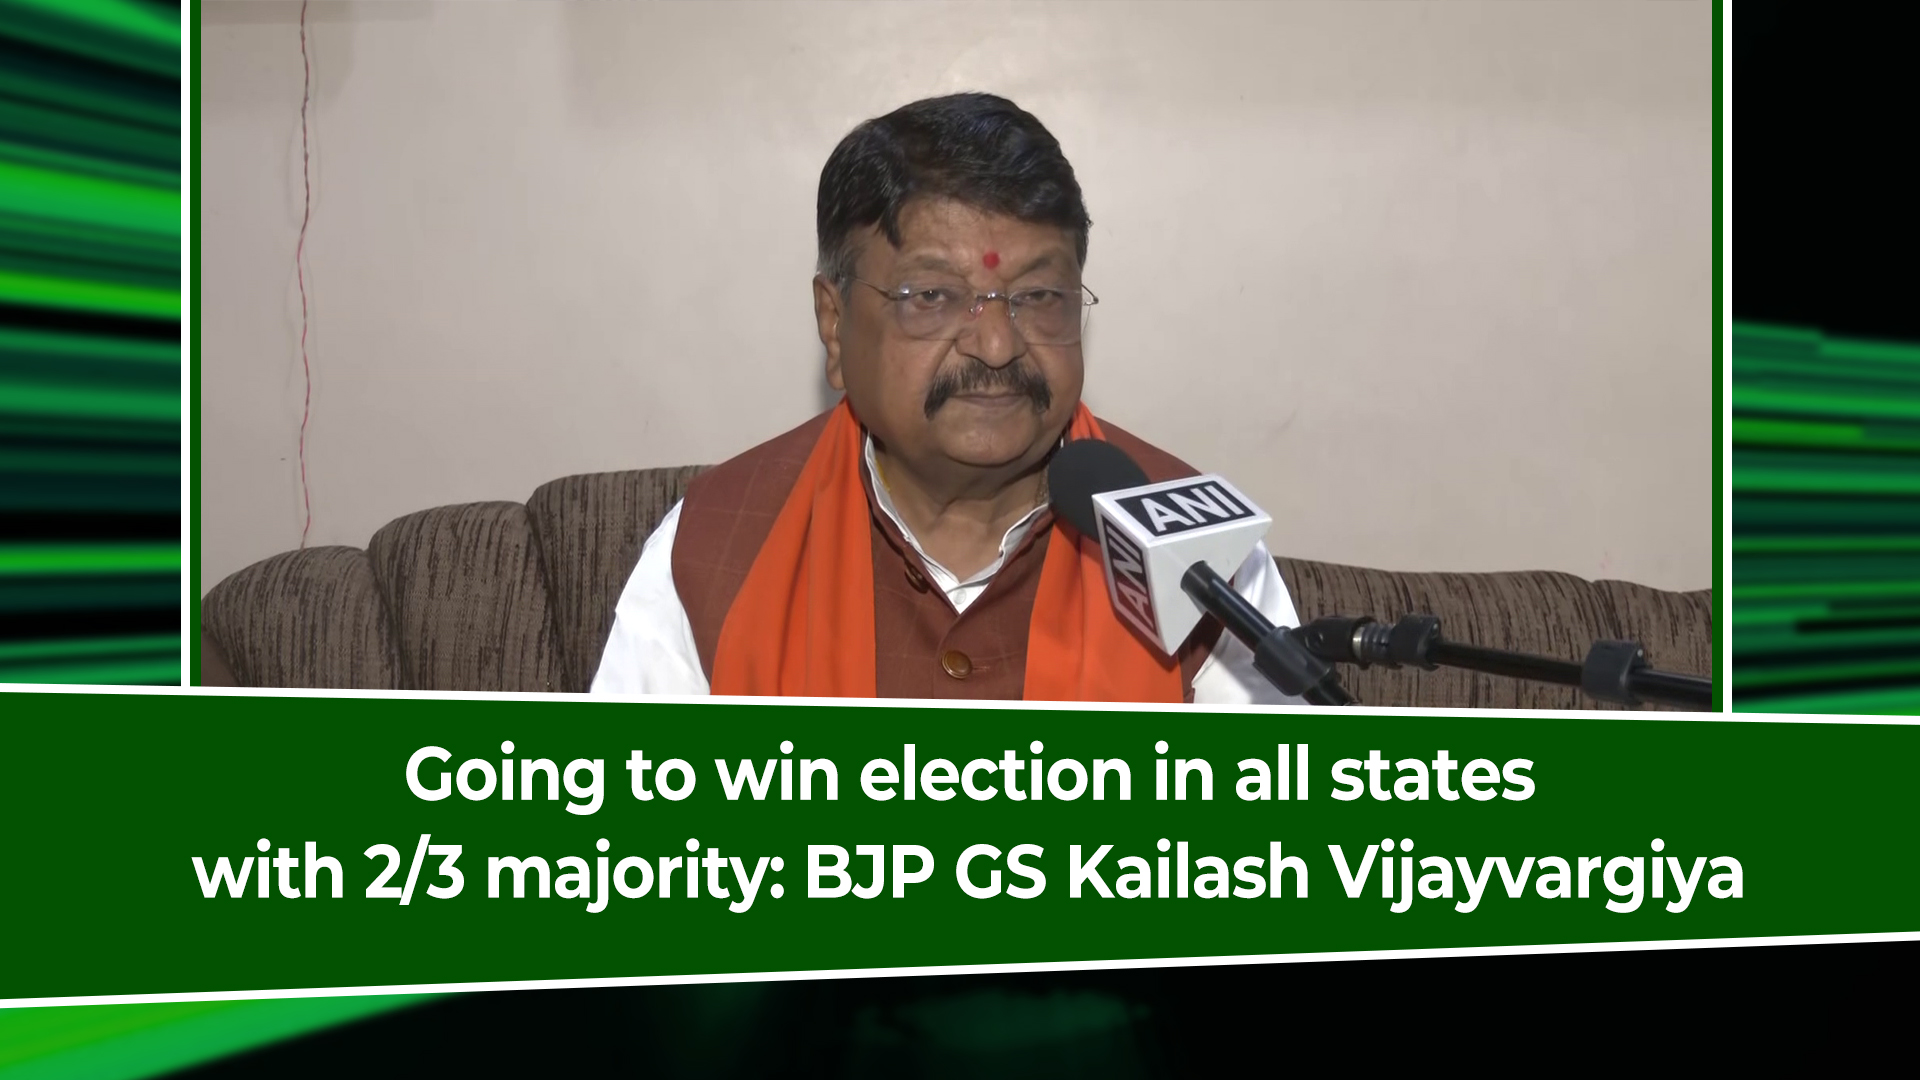 Going to win election in all states with 2/3 majority: BJP GS Kailash Vijayvargiya